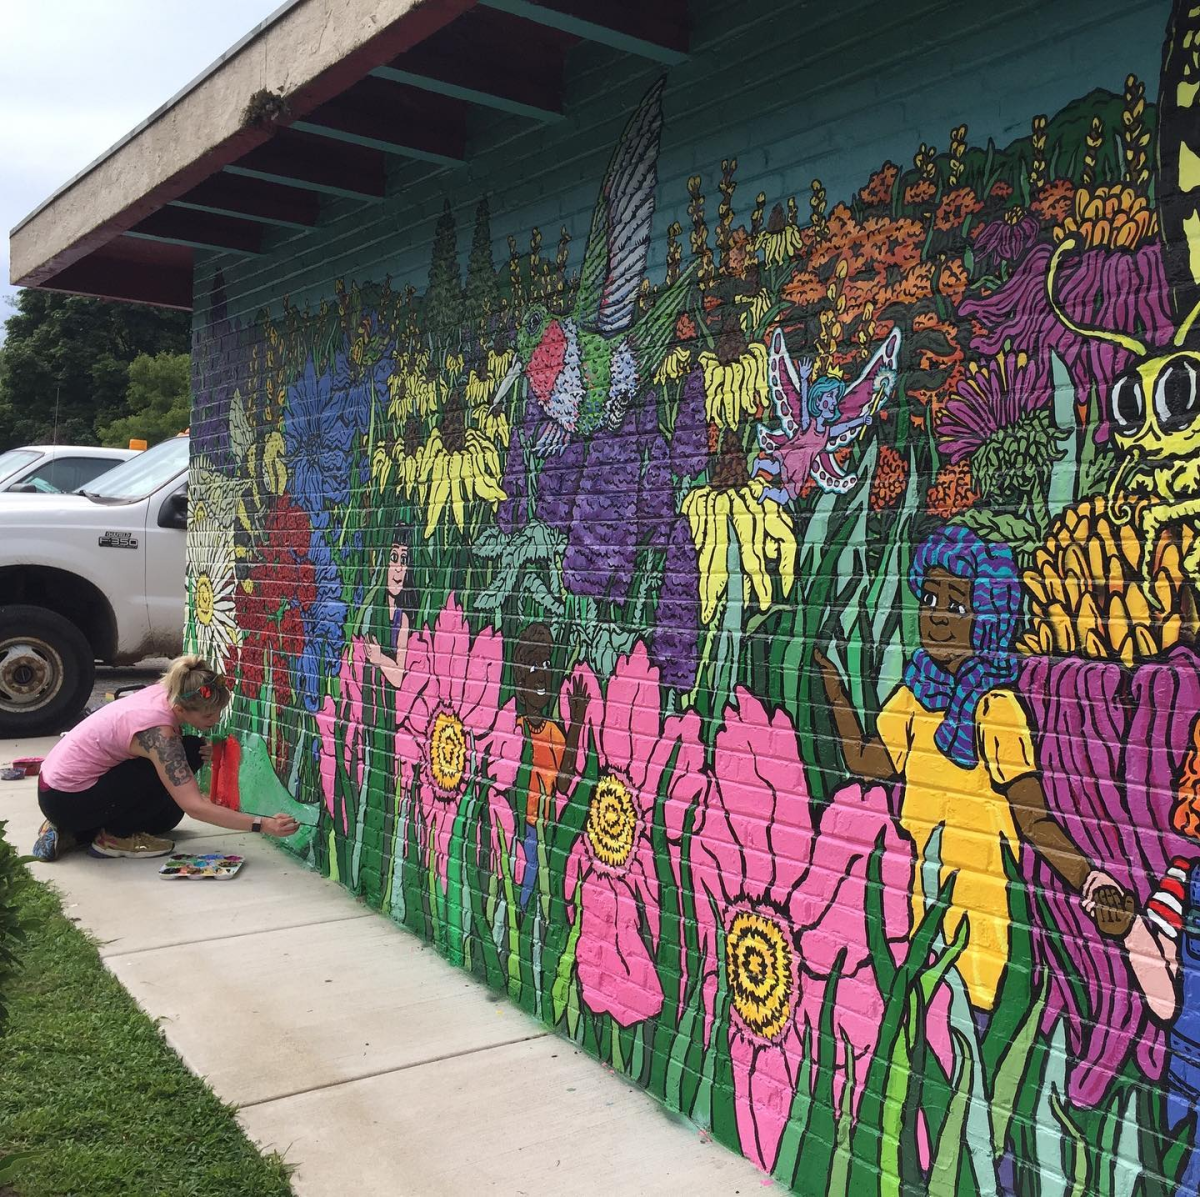 A person paints a bright, floral mural on a brick wall.